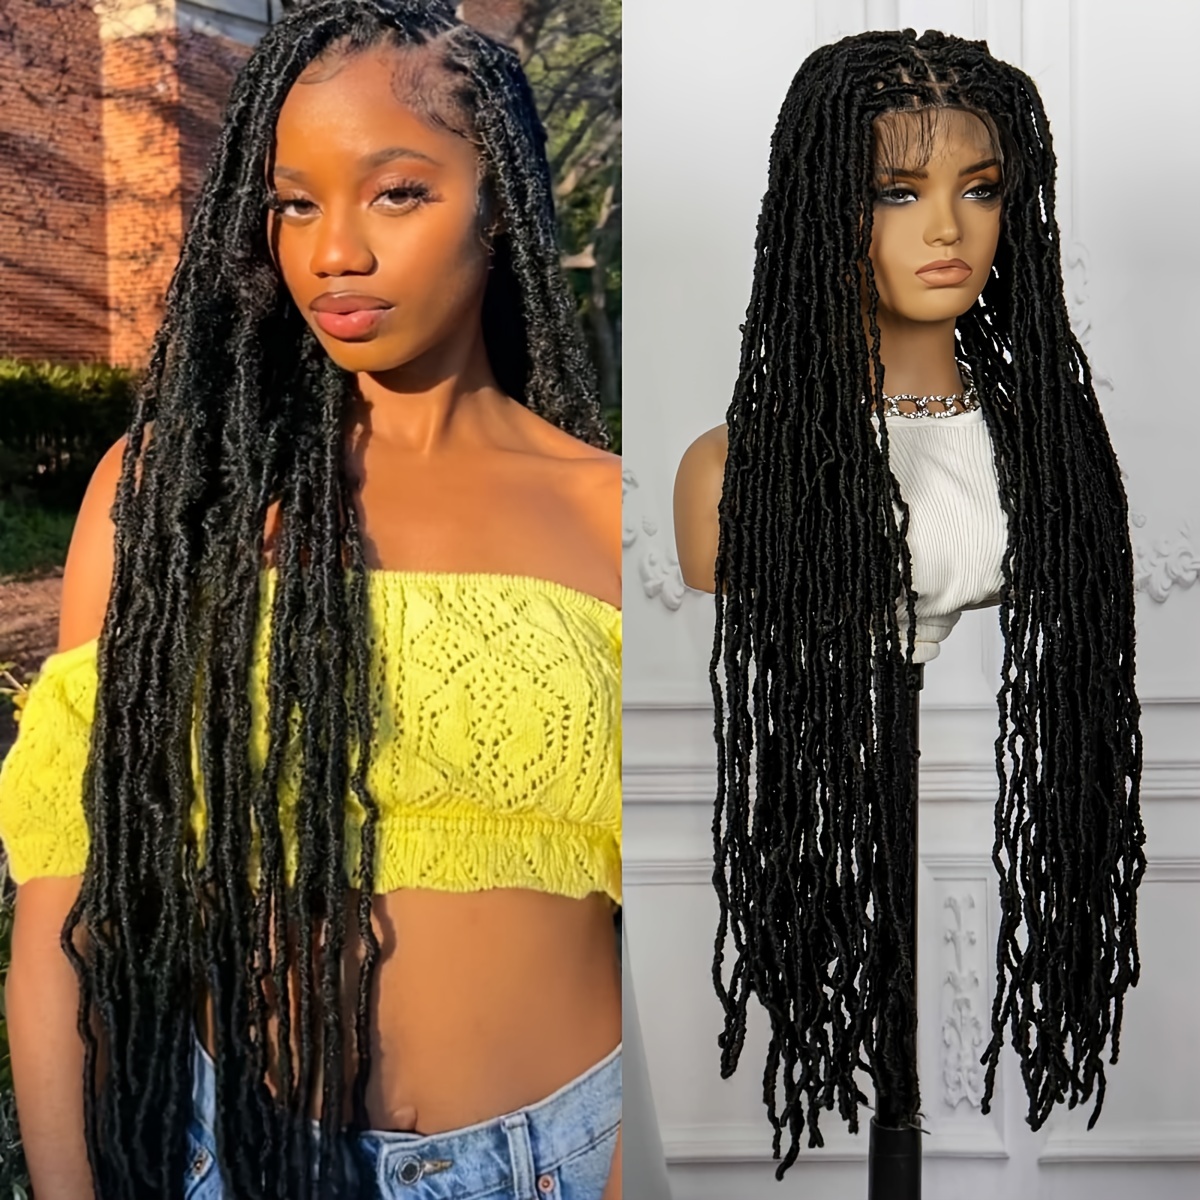 Long Micro Braid Braided Wig, Lace Front Wig, Full Lace Wig, Frontal Wig, Braid  Wig, Braided Lace Wigs, Micro Braids Full Lace Wig -  Israel